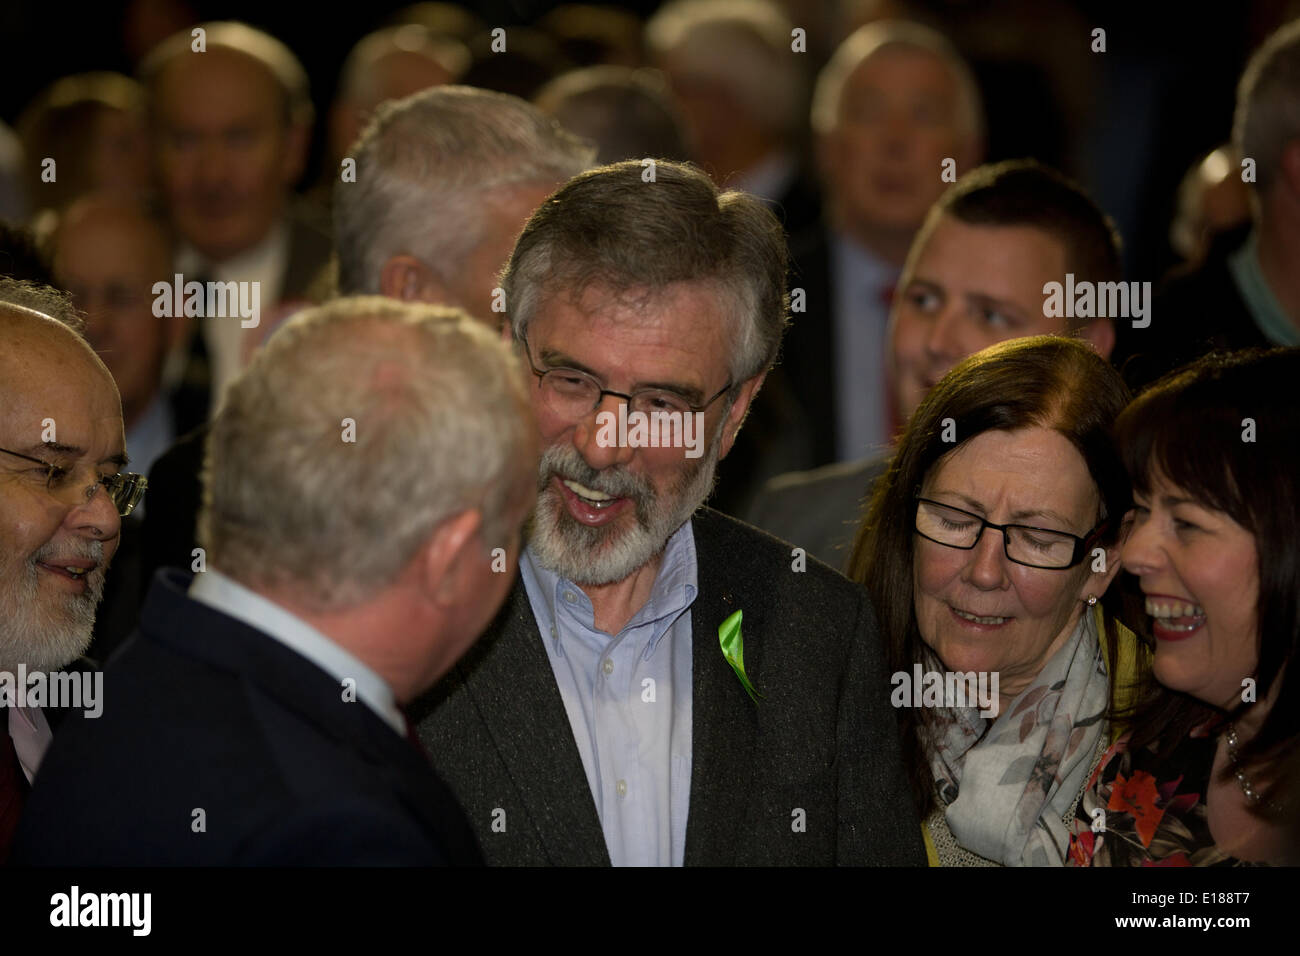 Belfast, UK. 26th May, 2014. Gerry Adams Smiling with Martin McGuinness and Michelle Gildernew at European Election Results in Belfast Credit:  Bonzo/Alamy Live News Stock Photo